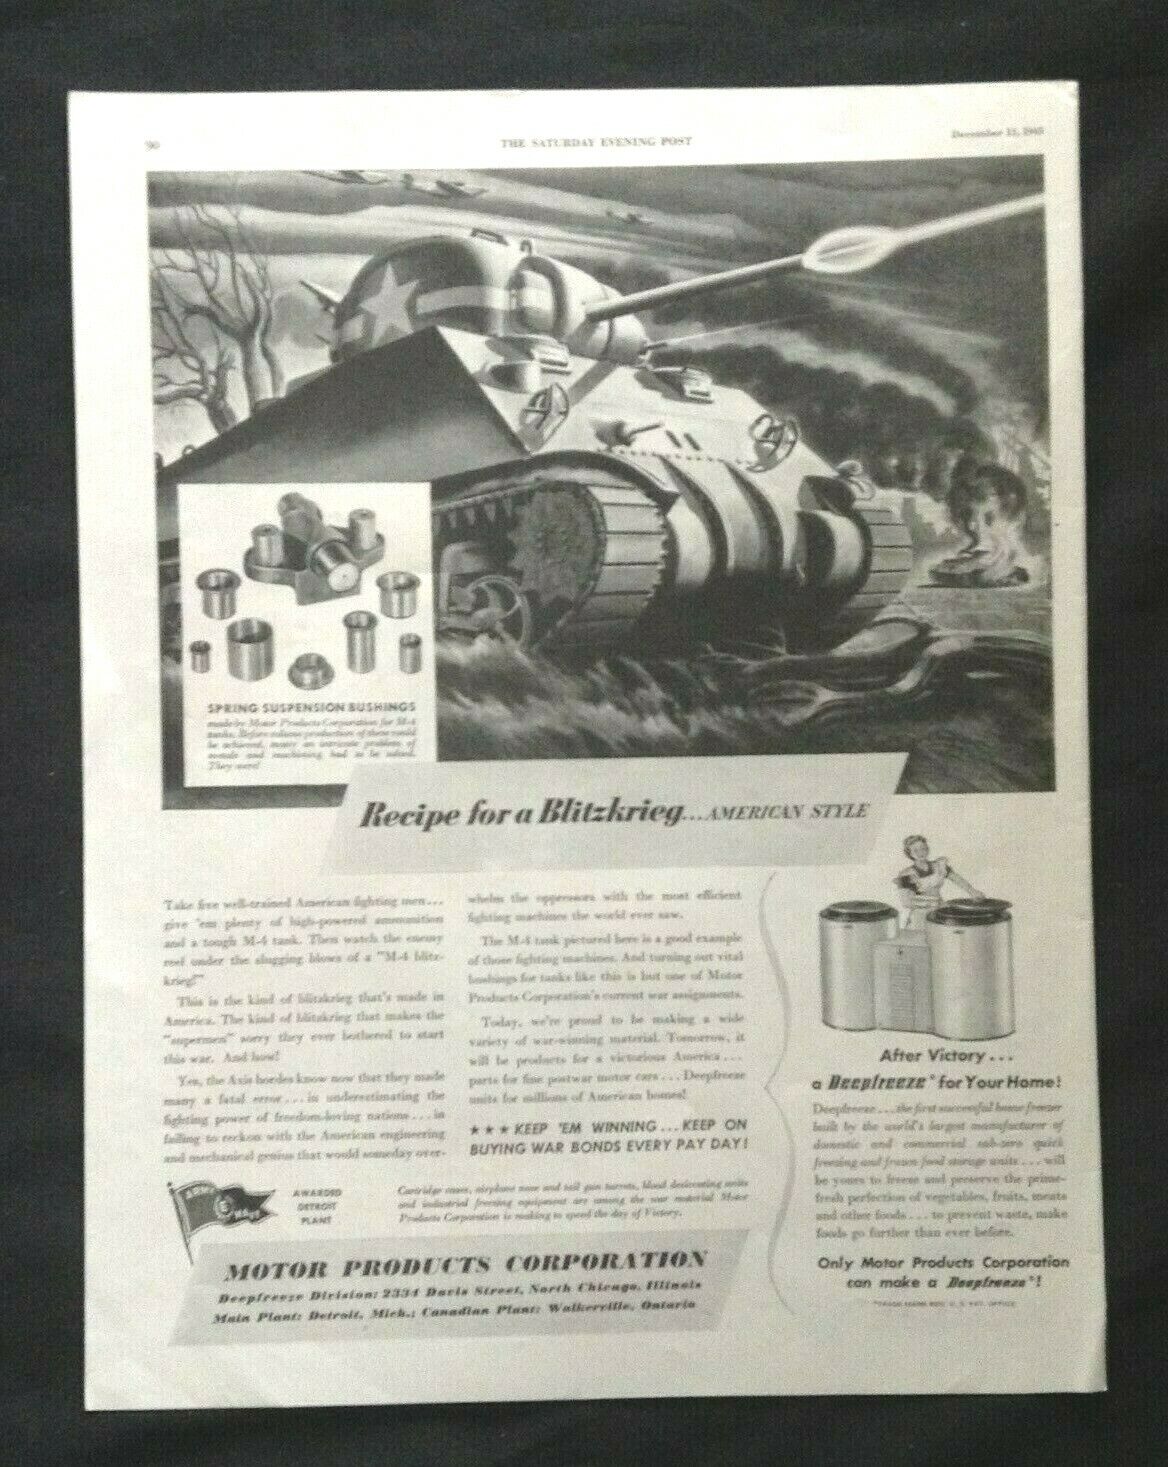 1943 VTG WWII Blitzkrieg M-4 Tank Print Ad ~ Motor Products Walkerville Ontario